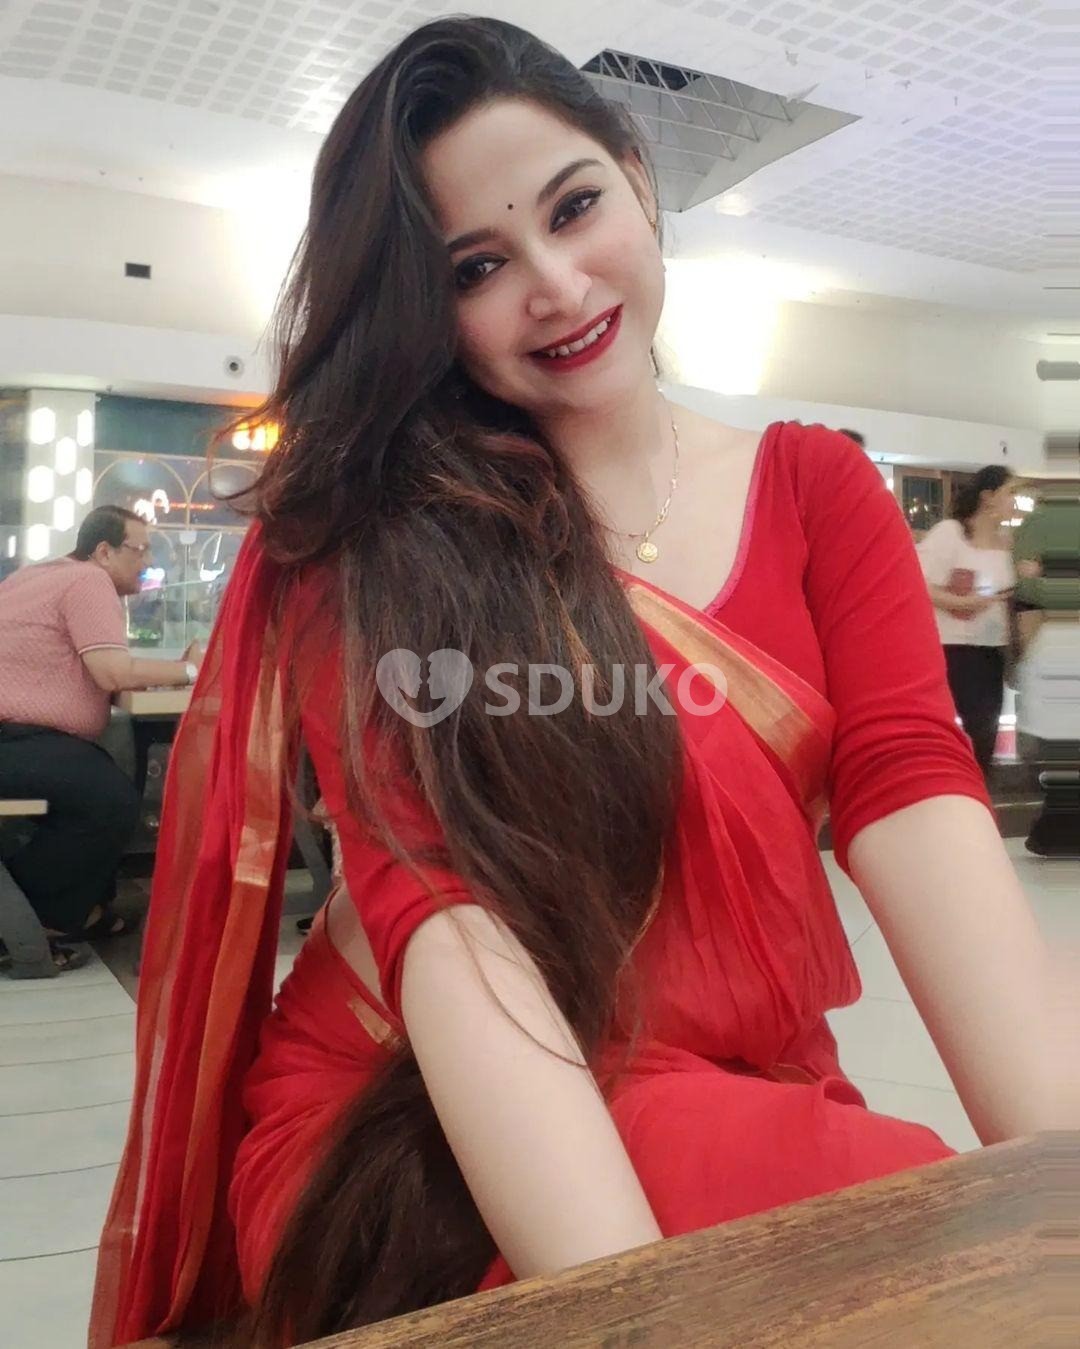 ❣️💞(MULUND)💕❣️ ROYAL ESCORT SERVICE AVAILABLE 24 × 7 HOURS